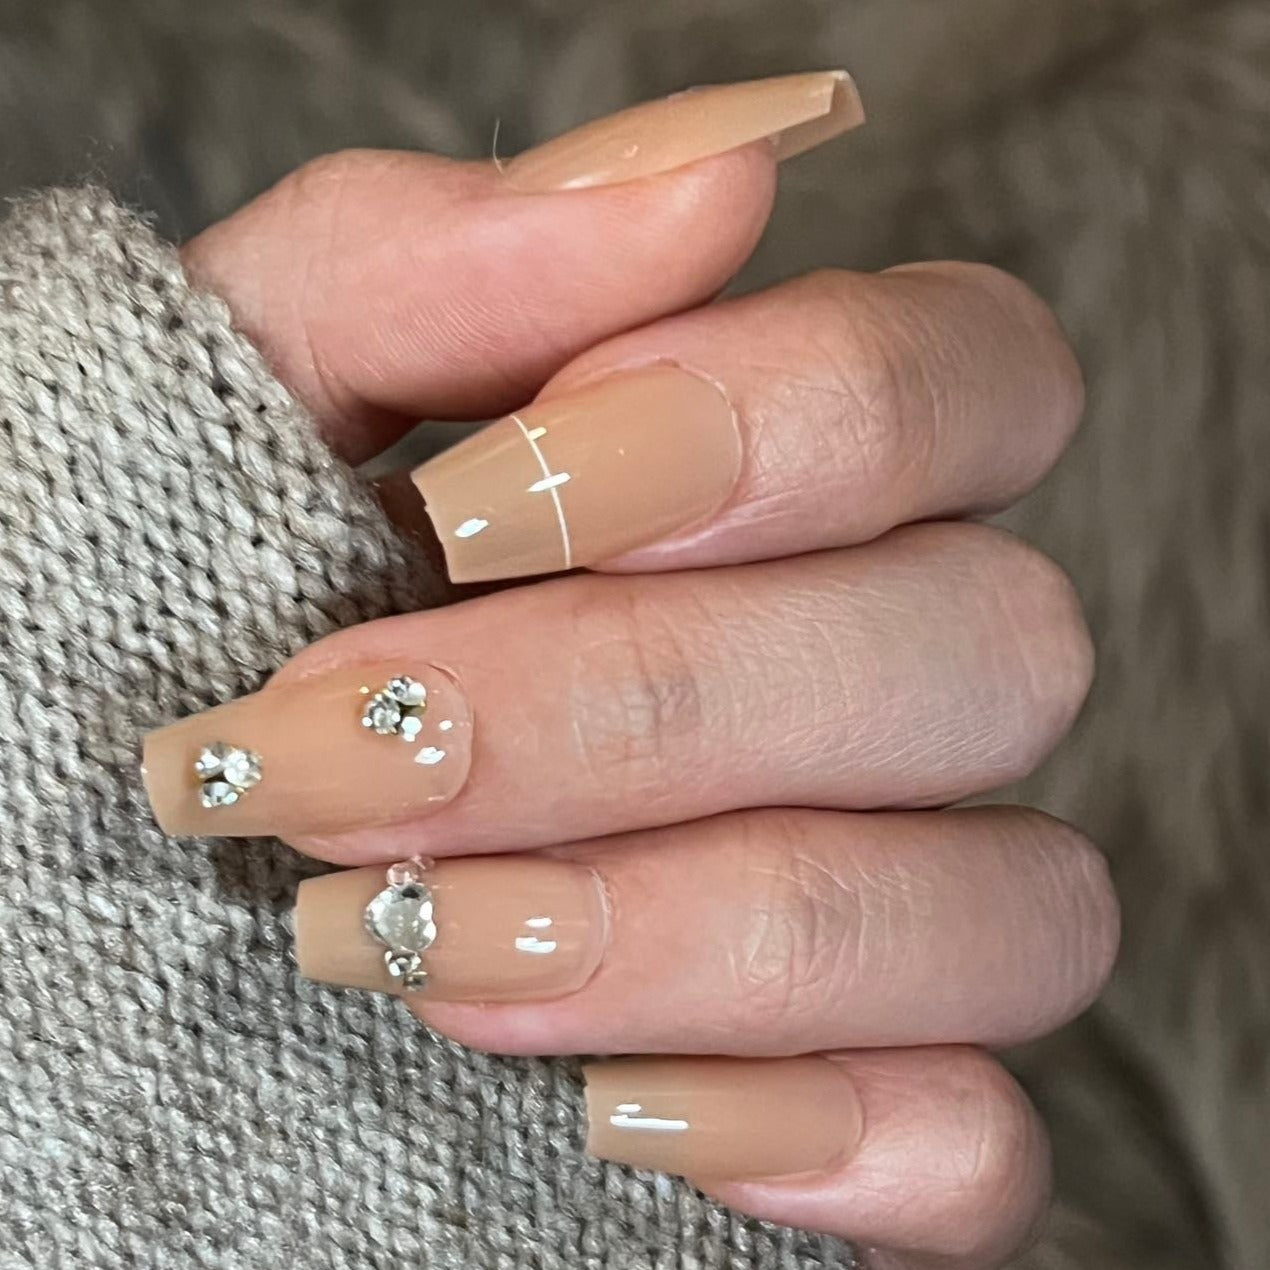 Crystal Press on Nails | Crystal Coffin Nails | Galspro